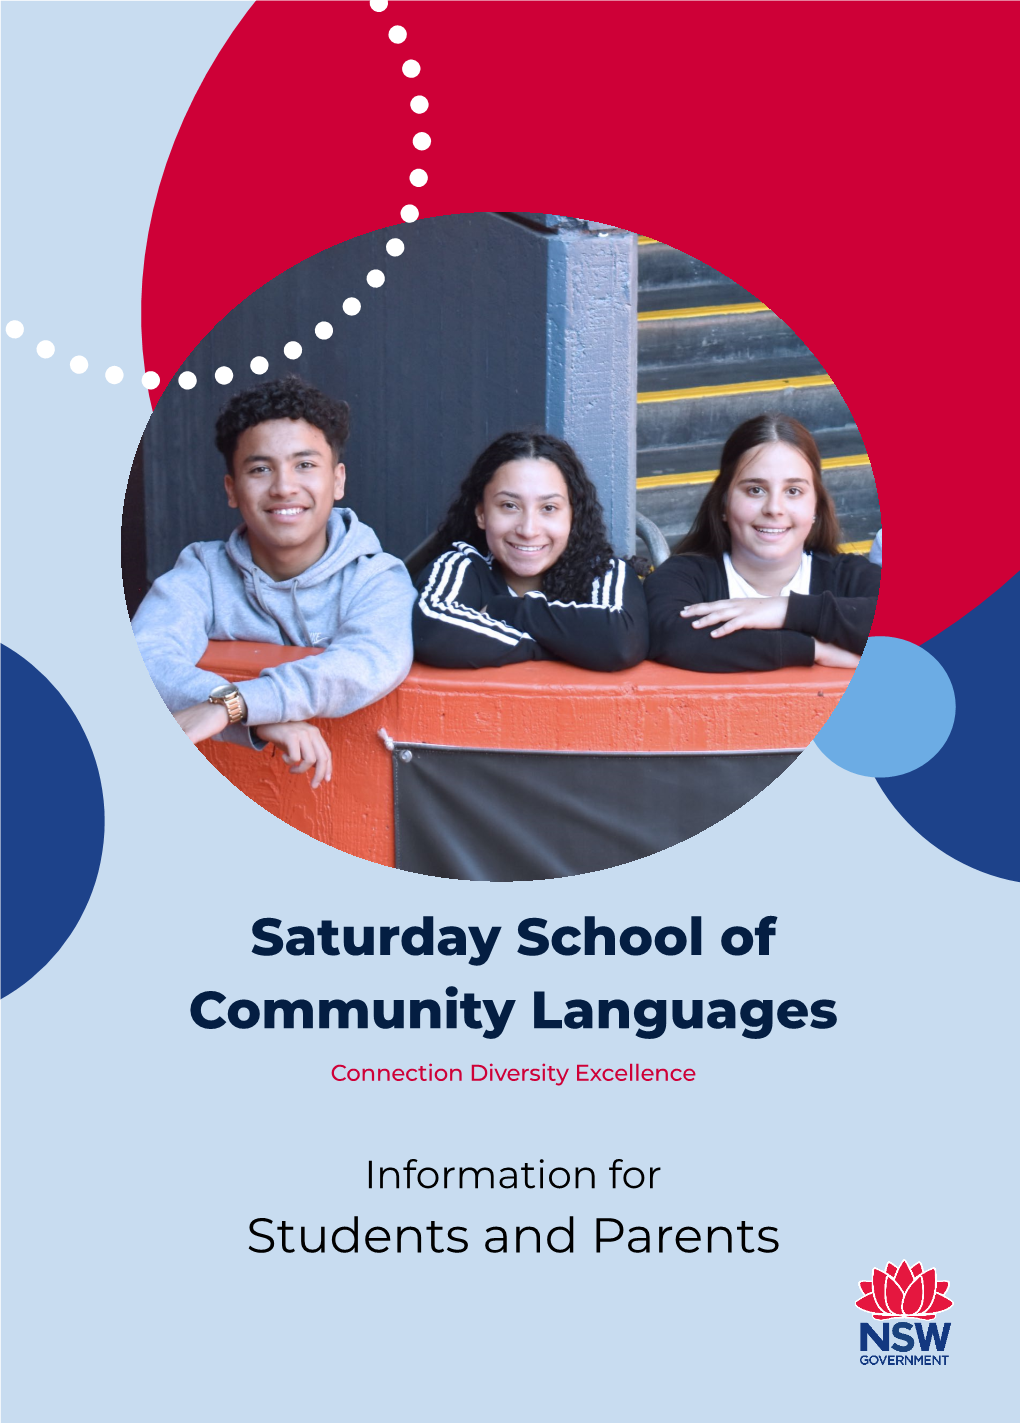 Saturday School of Community Languages Connection Diversity Excellence